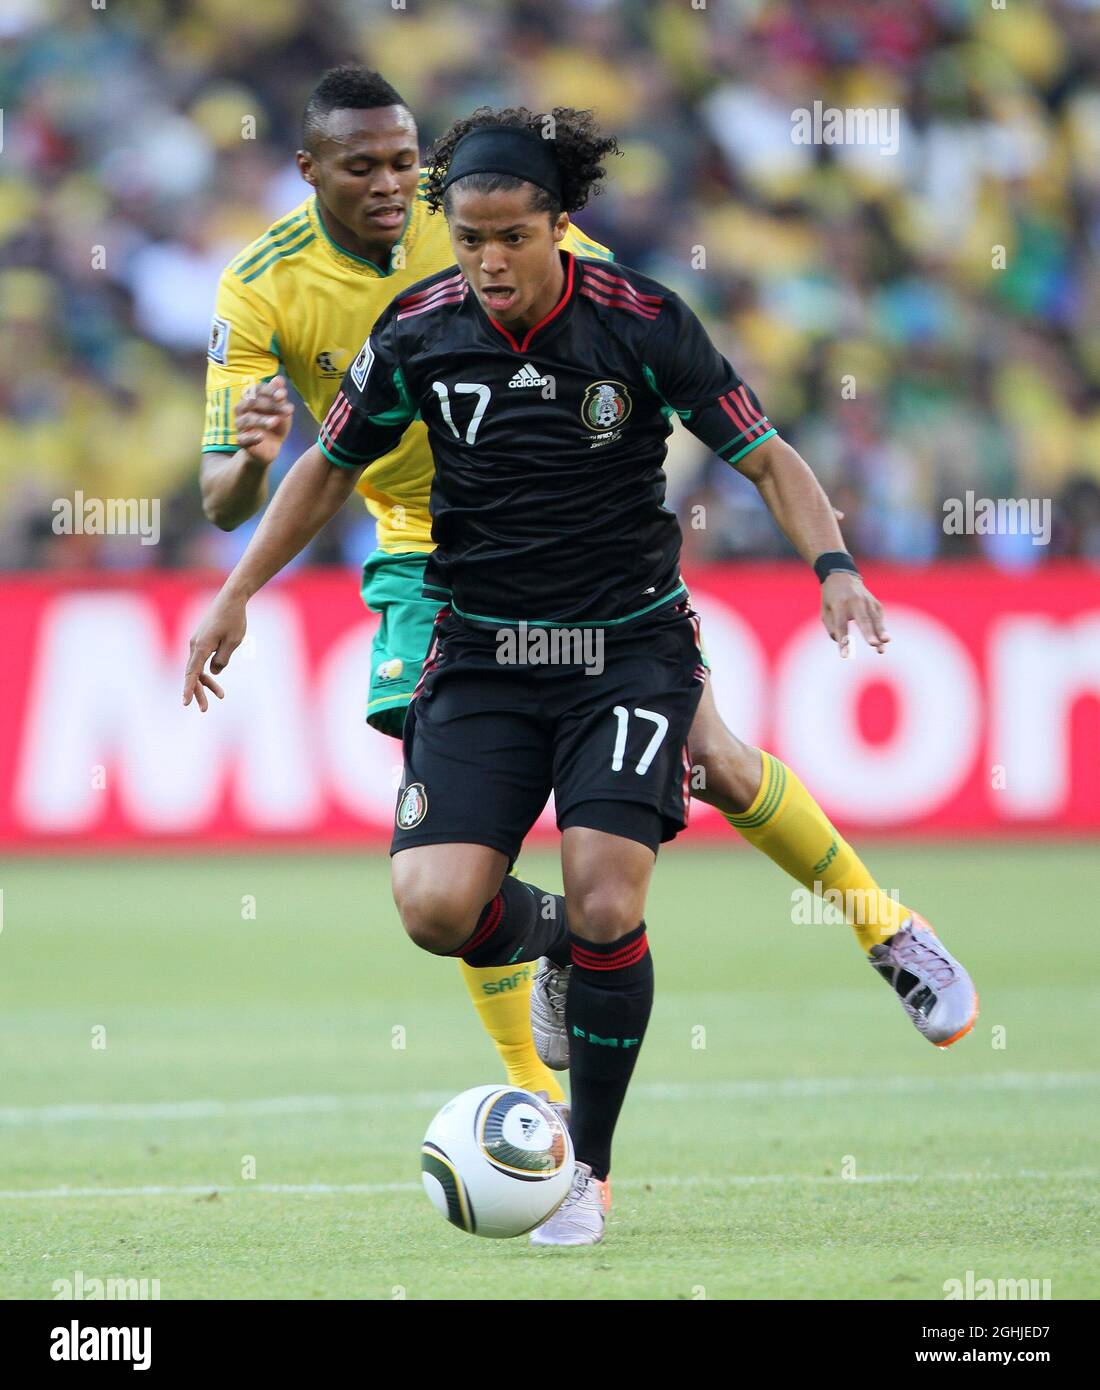 Mexico's Giovani Dos Santos in action during the FIFA World Cup 2010, Group A match between South Africa v Mexico Soccer City stadium in Johannesburg, South Africa. Stock Photo